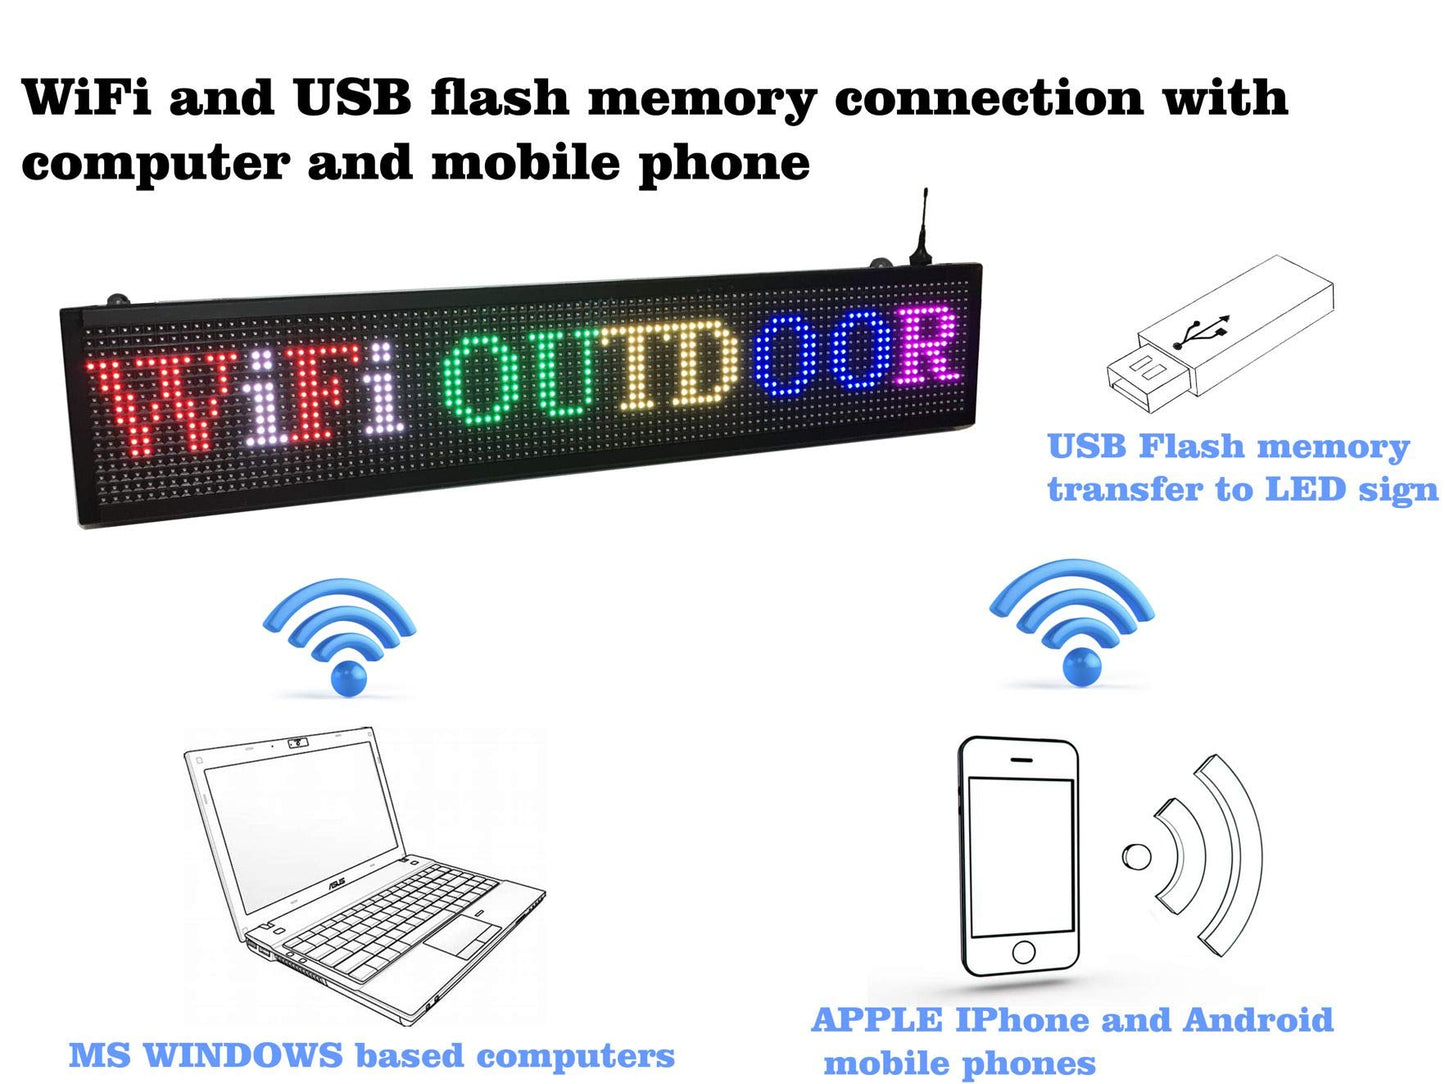 LED WiFi+USB RGB color sign 40" x 8" with high resolution P10 and new SMD technology. Perfect solution for advertising